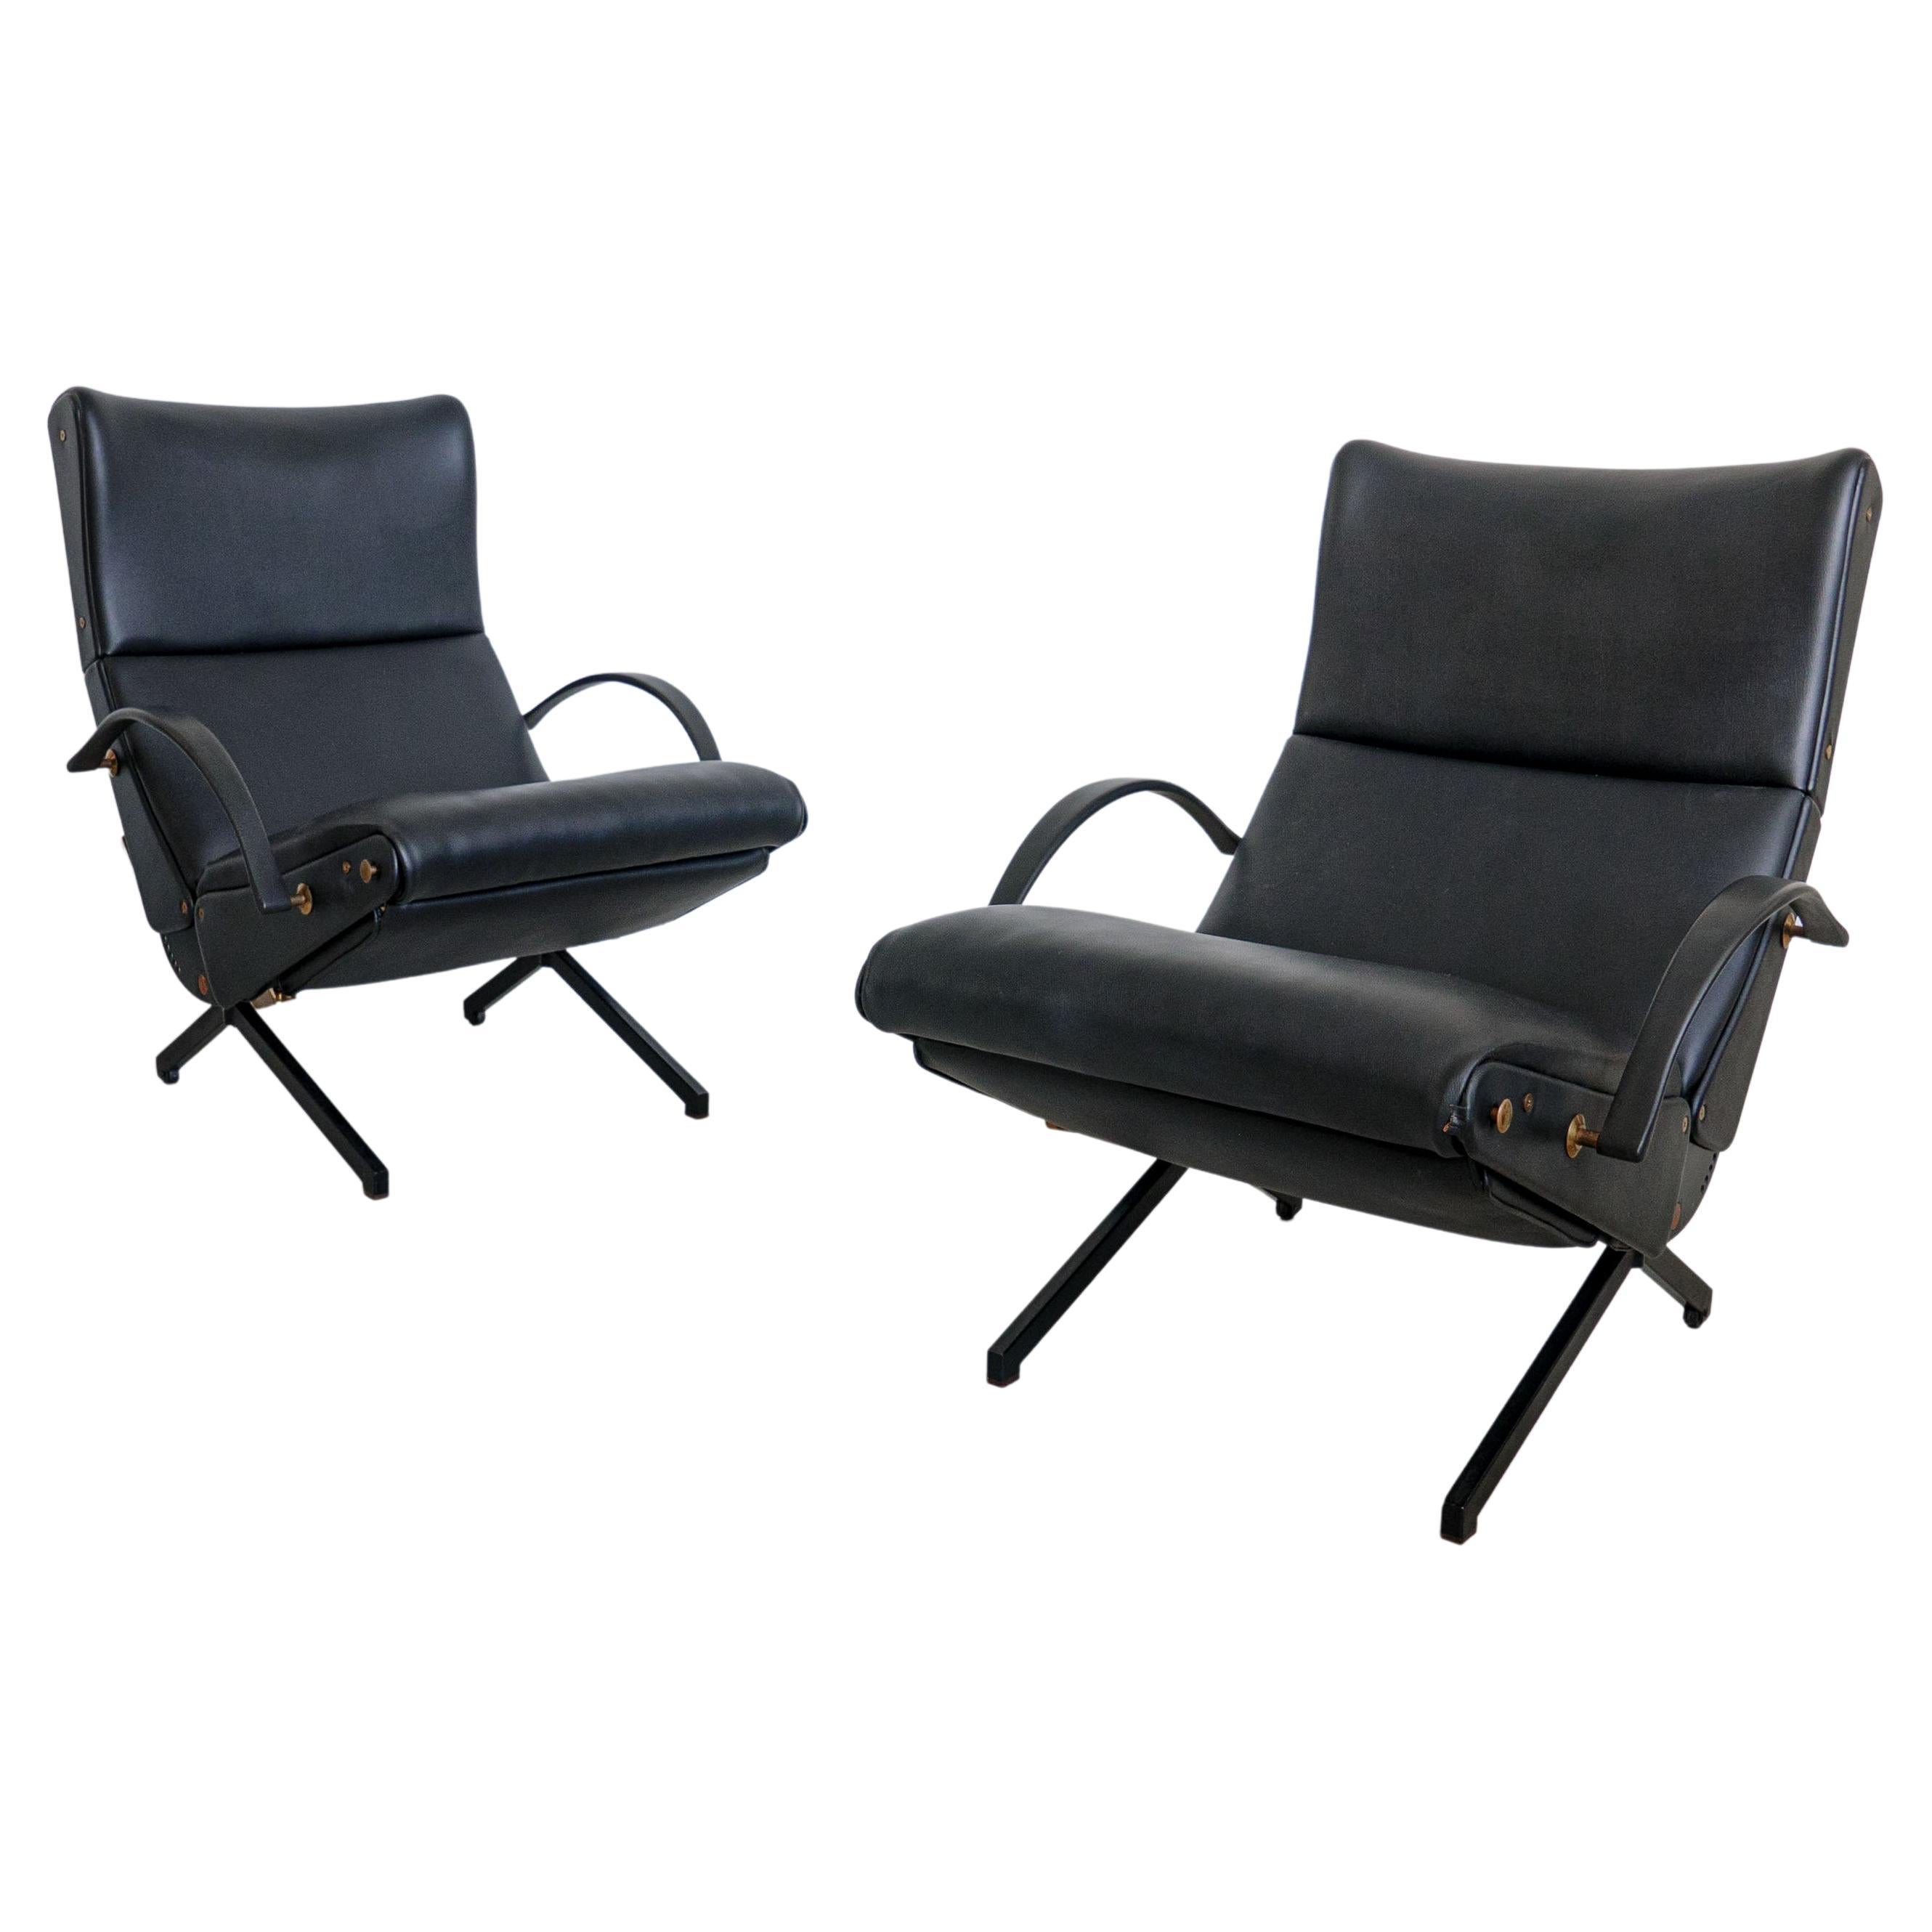 Set of Two Vintage P40 Lounge Chairs by Osvaldo Borsani for Tecno, Black Leather